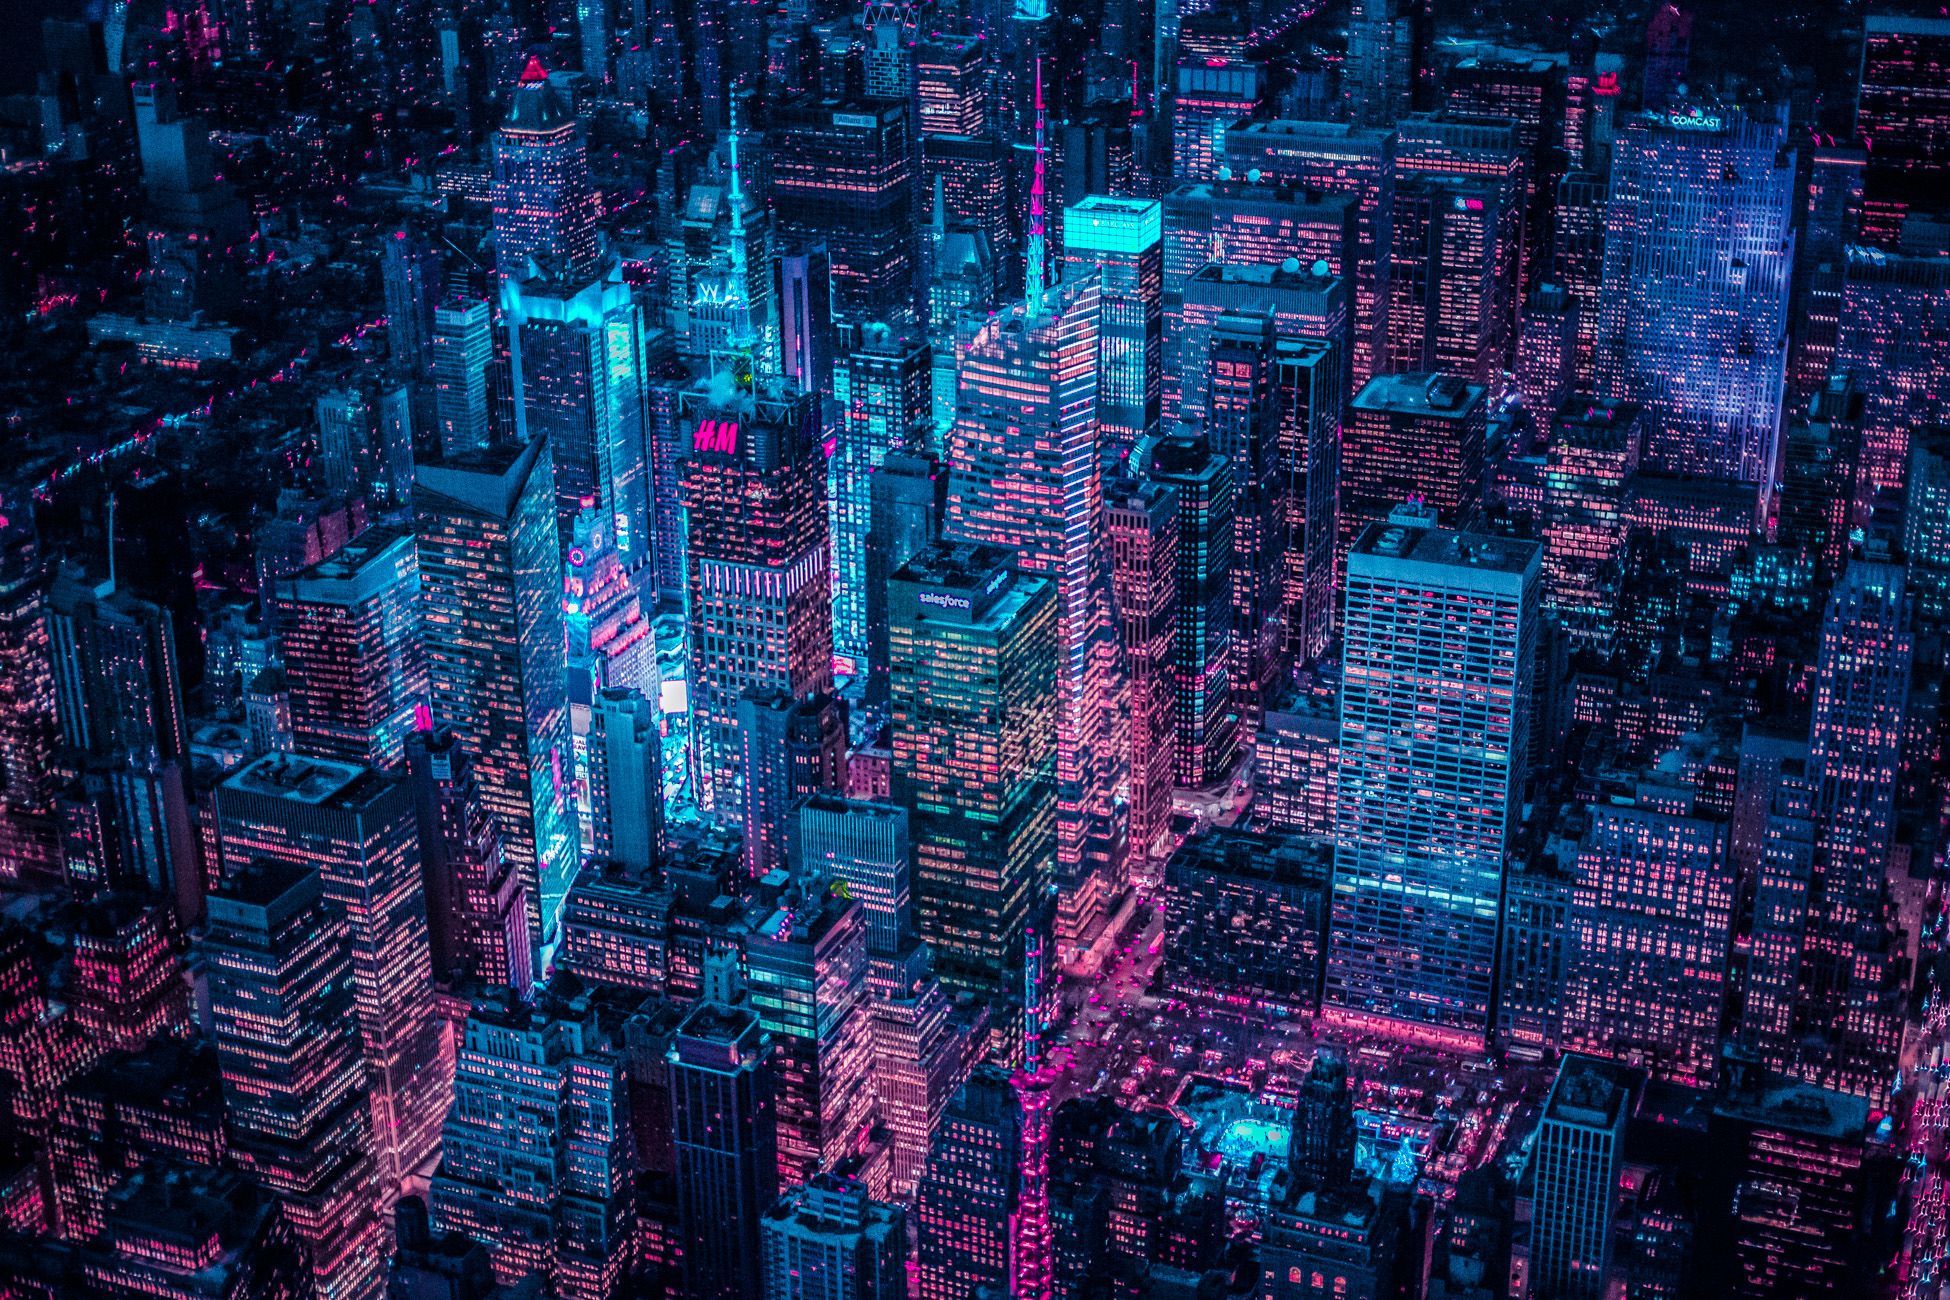 Neon photographs of Times Square shot from above show a futuristic NYC ...